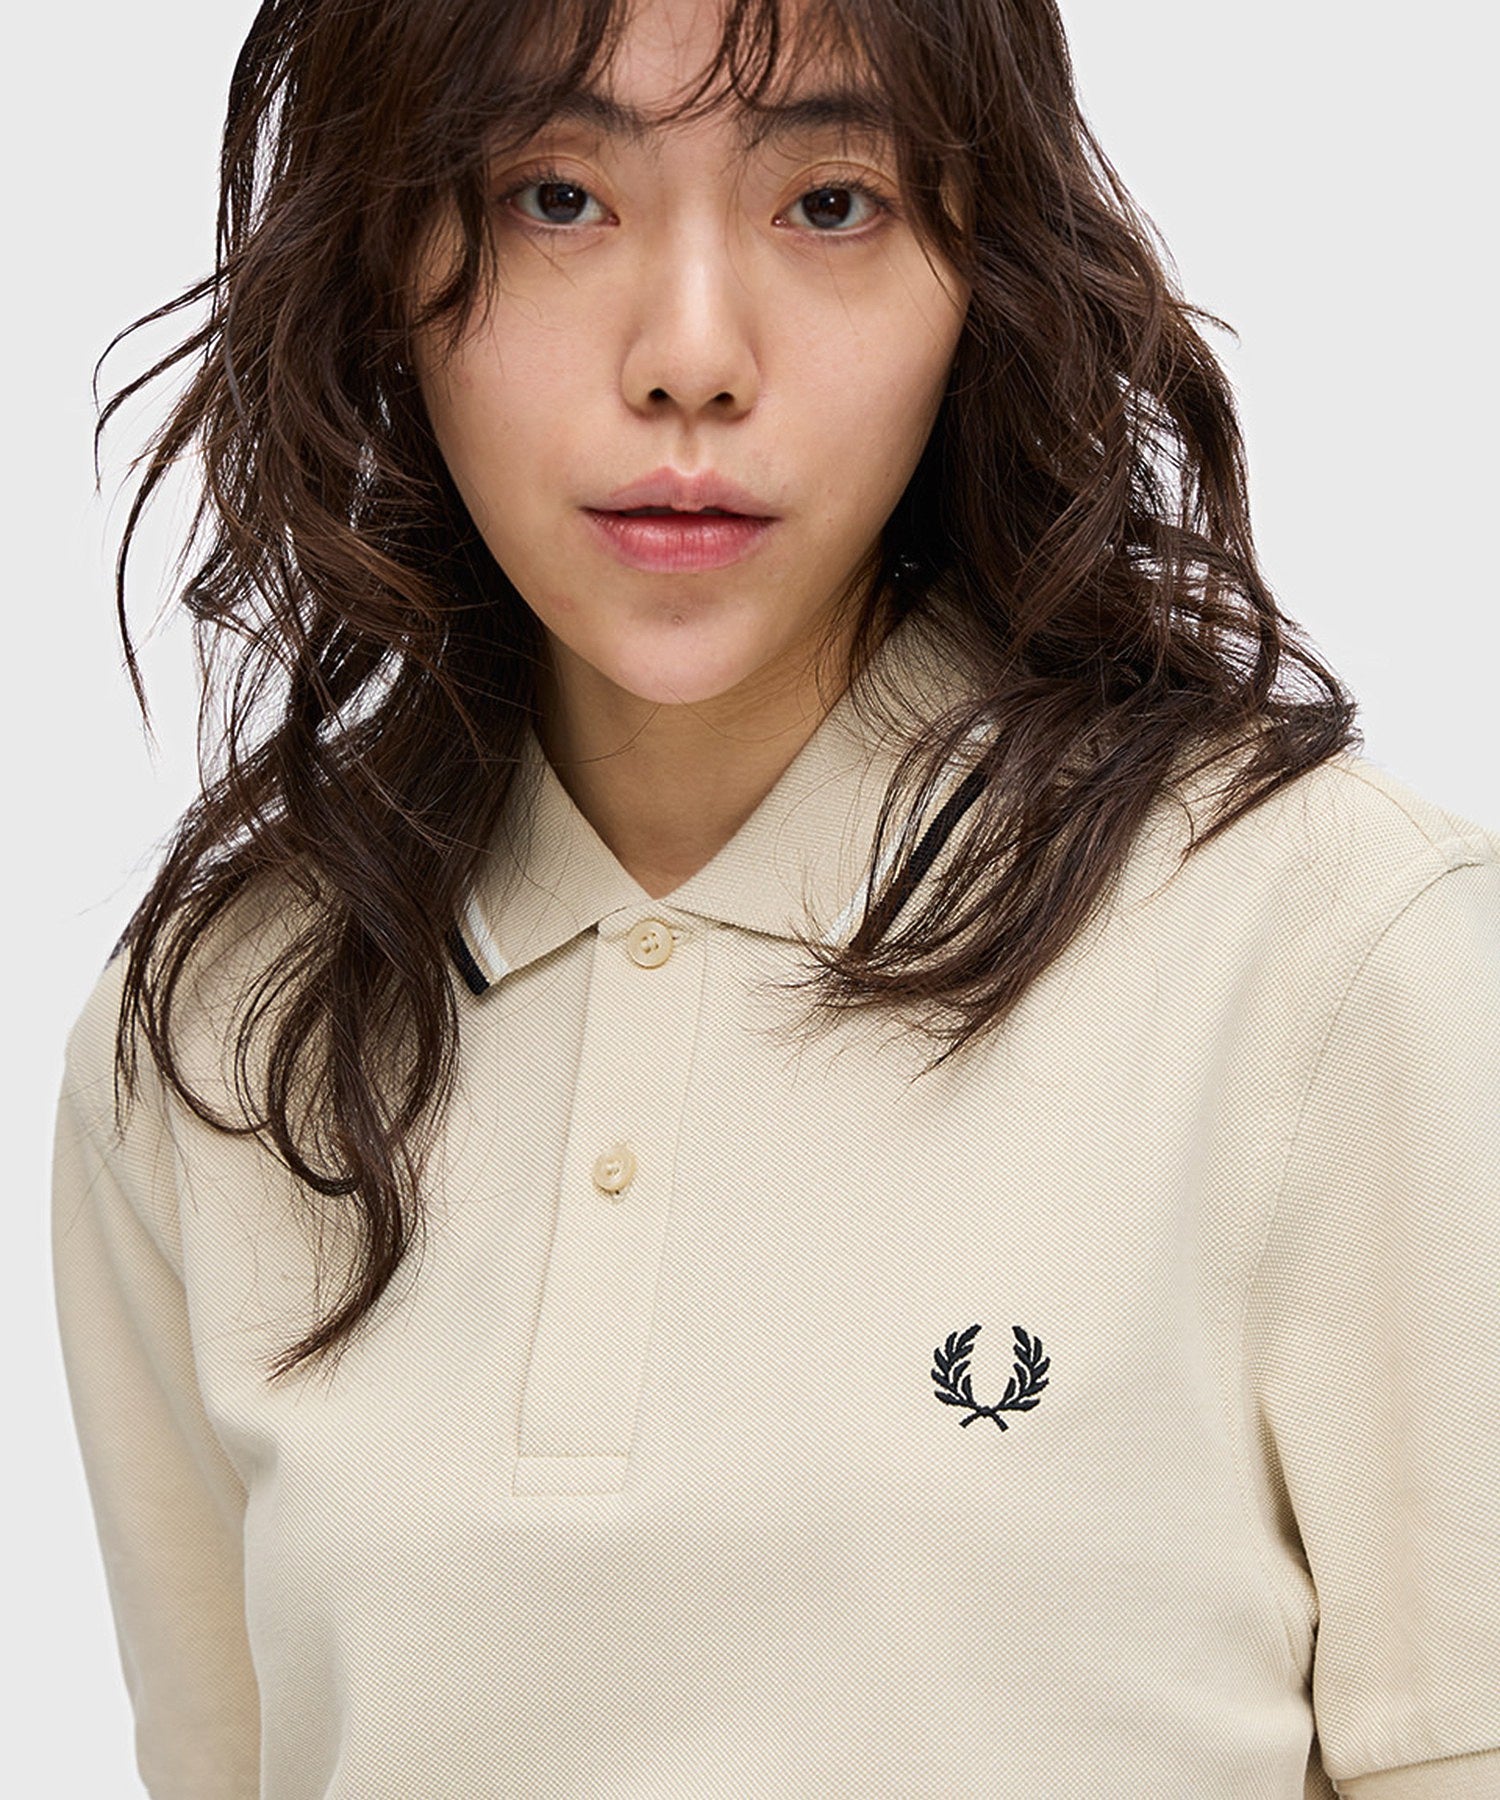 FRED PERRY/フレッドペリー/TWIN TIPPED FRED PERRY SHIRT/M3600/U87